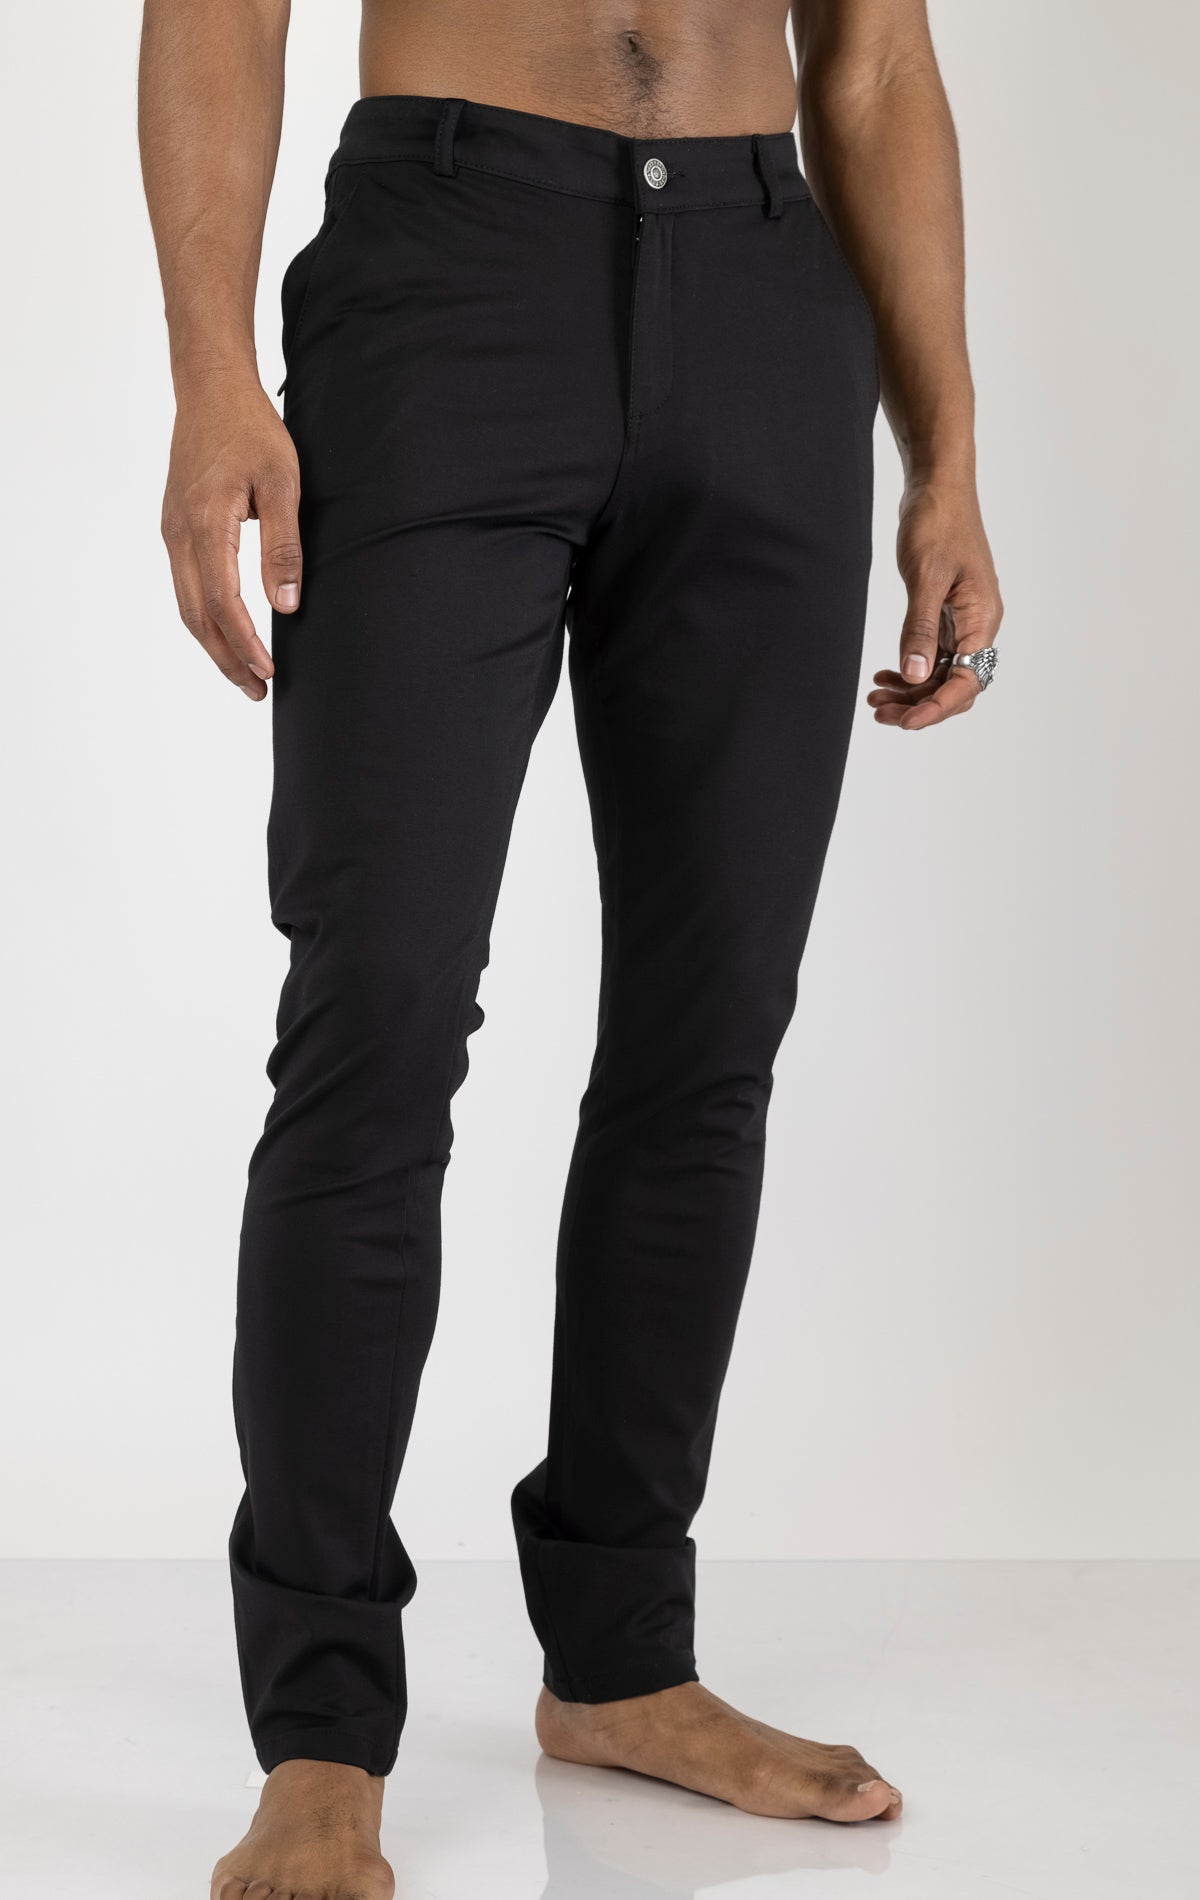 Men's casual wear pants in black. The pants are made from a blend of rayon (65%), nylon (27%), and elastane (8%) and feature a classic design with straight or tapered legs, belt loops, pockets, and a zip fly with button closure.